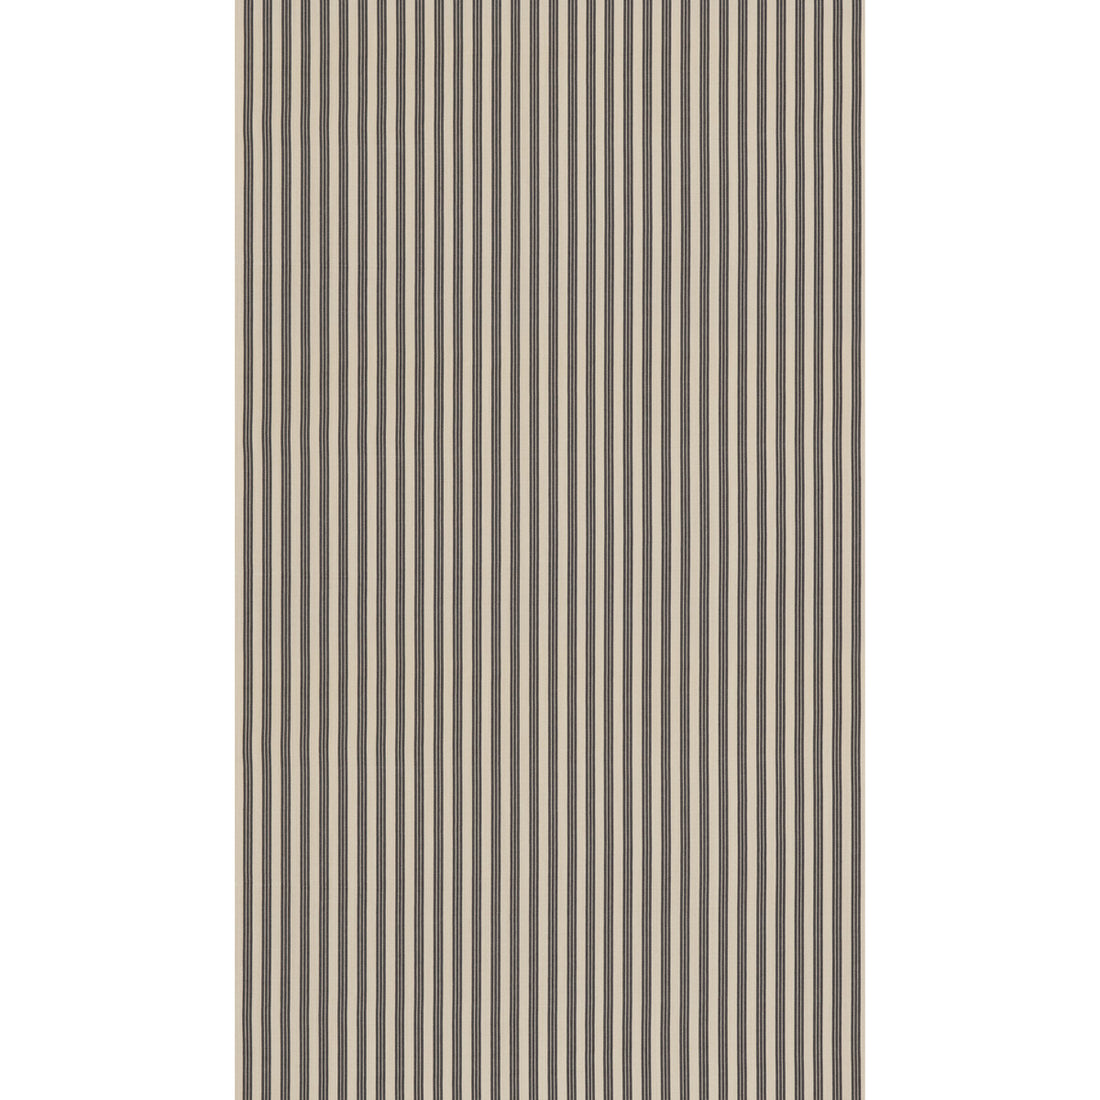 Taftan Stripe fabric in ebony color - pattern ED85346.955.0 - by Threads in the Faraway collection